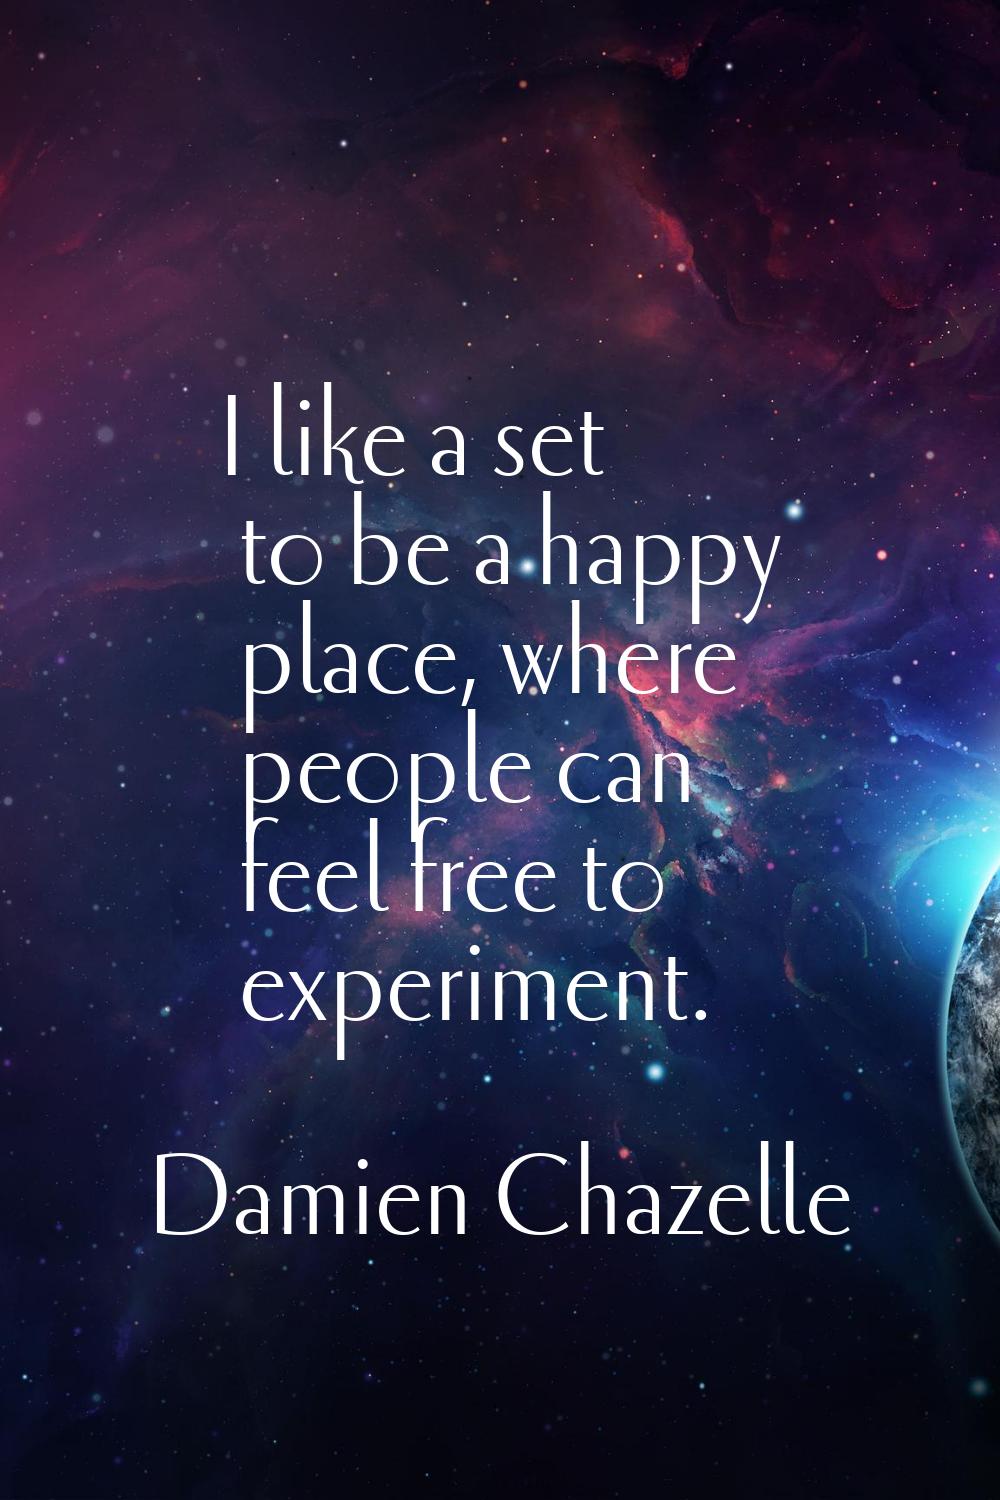 I like a set to be a happy place, where people can feel free to experiment.